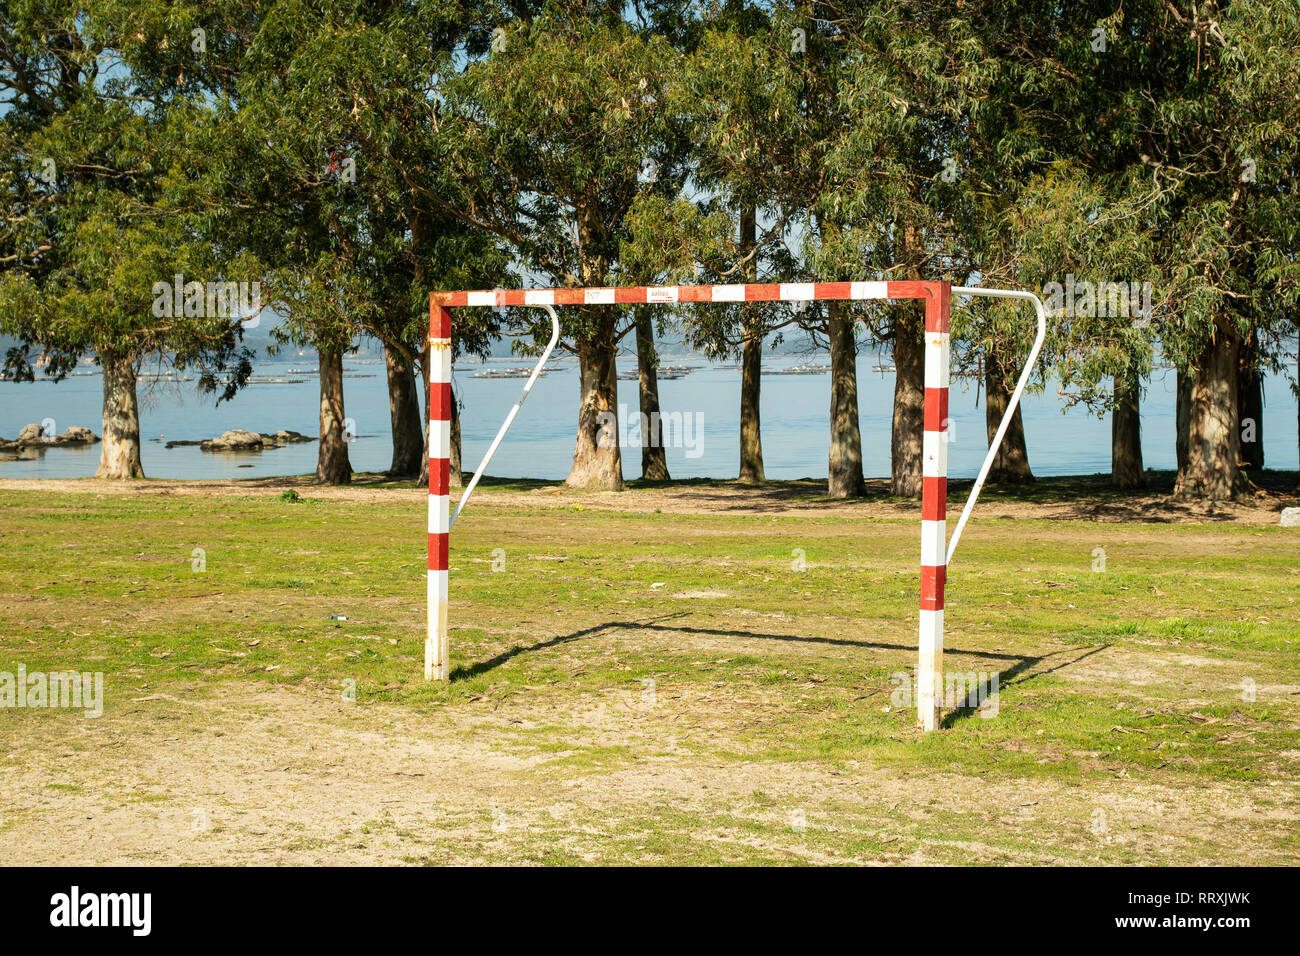 Soccer gate in amateur soccer court with trees and sea at background Stock Photo